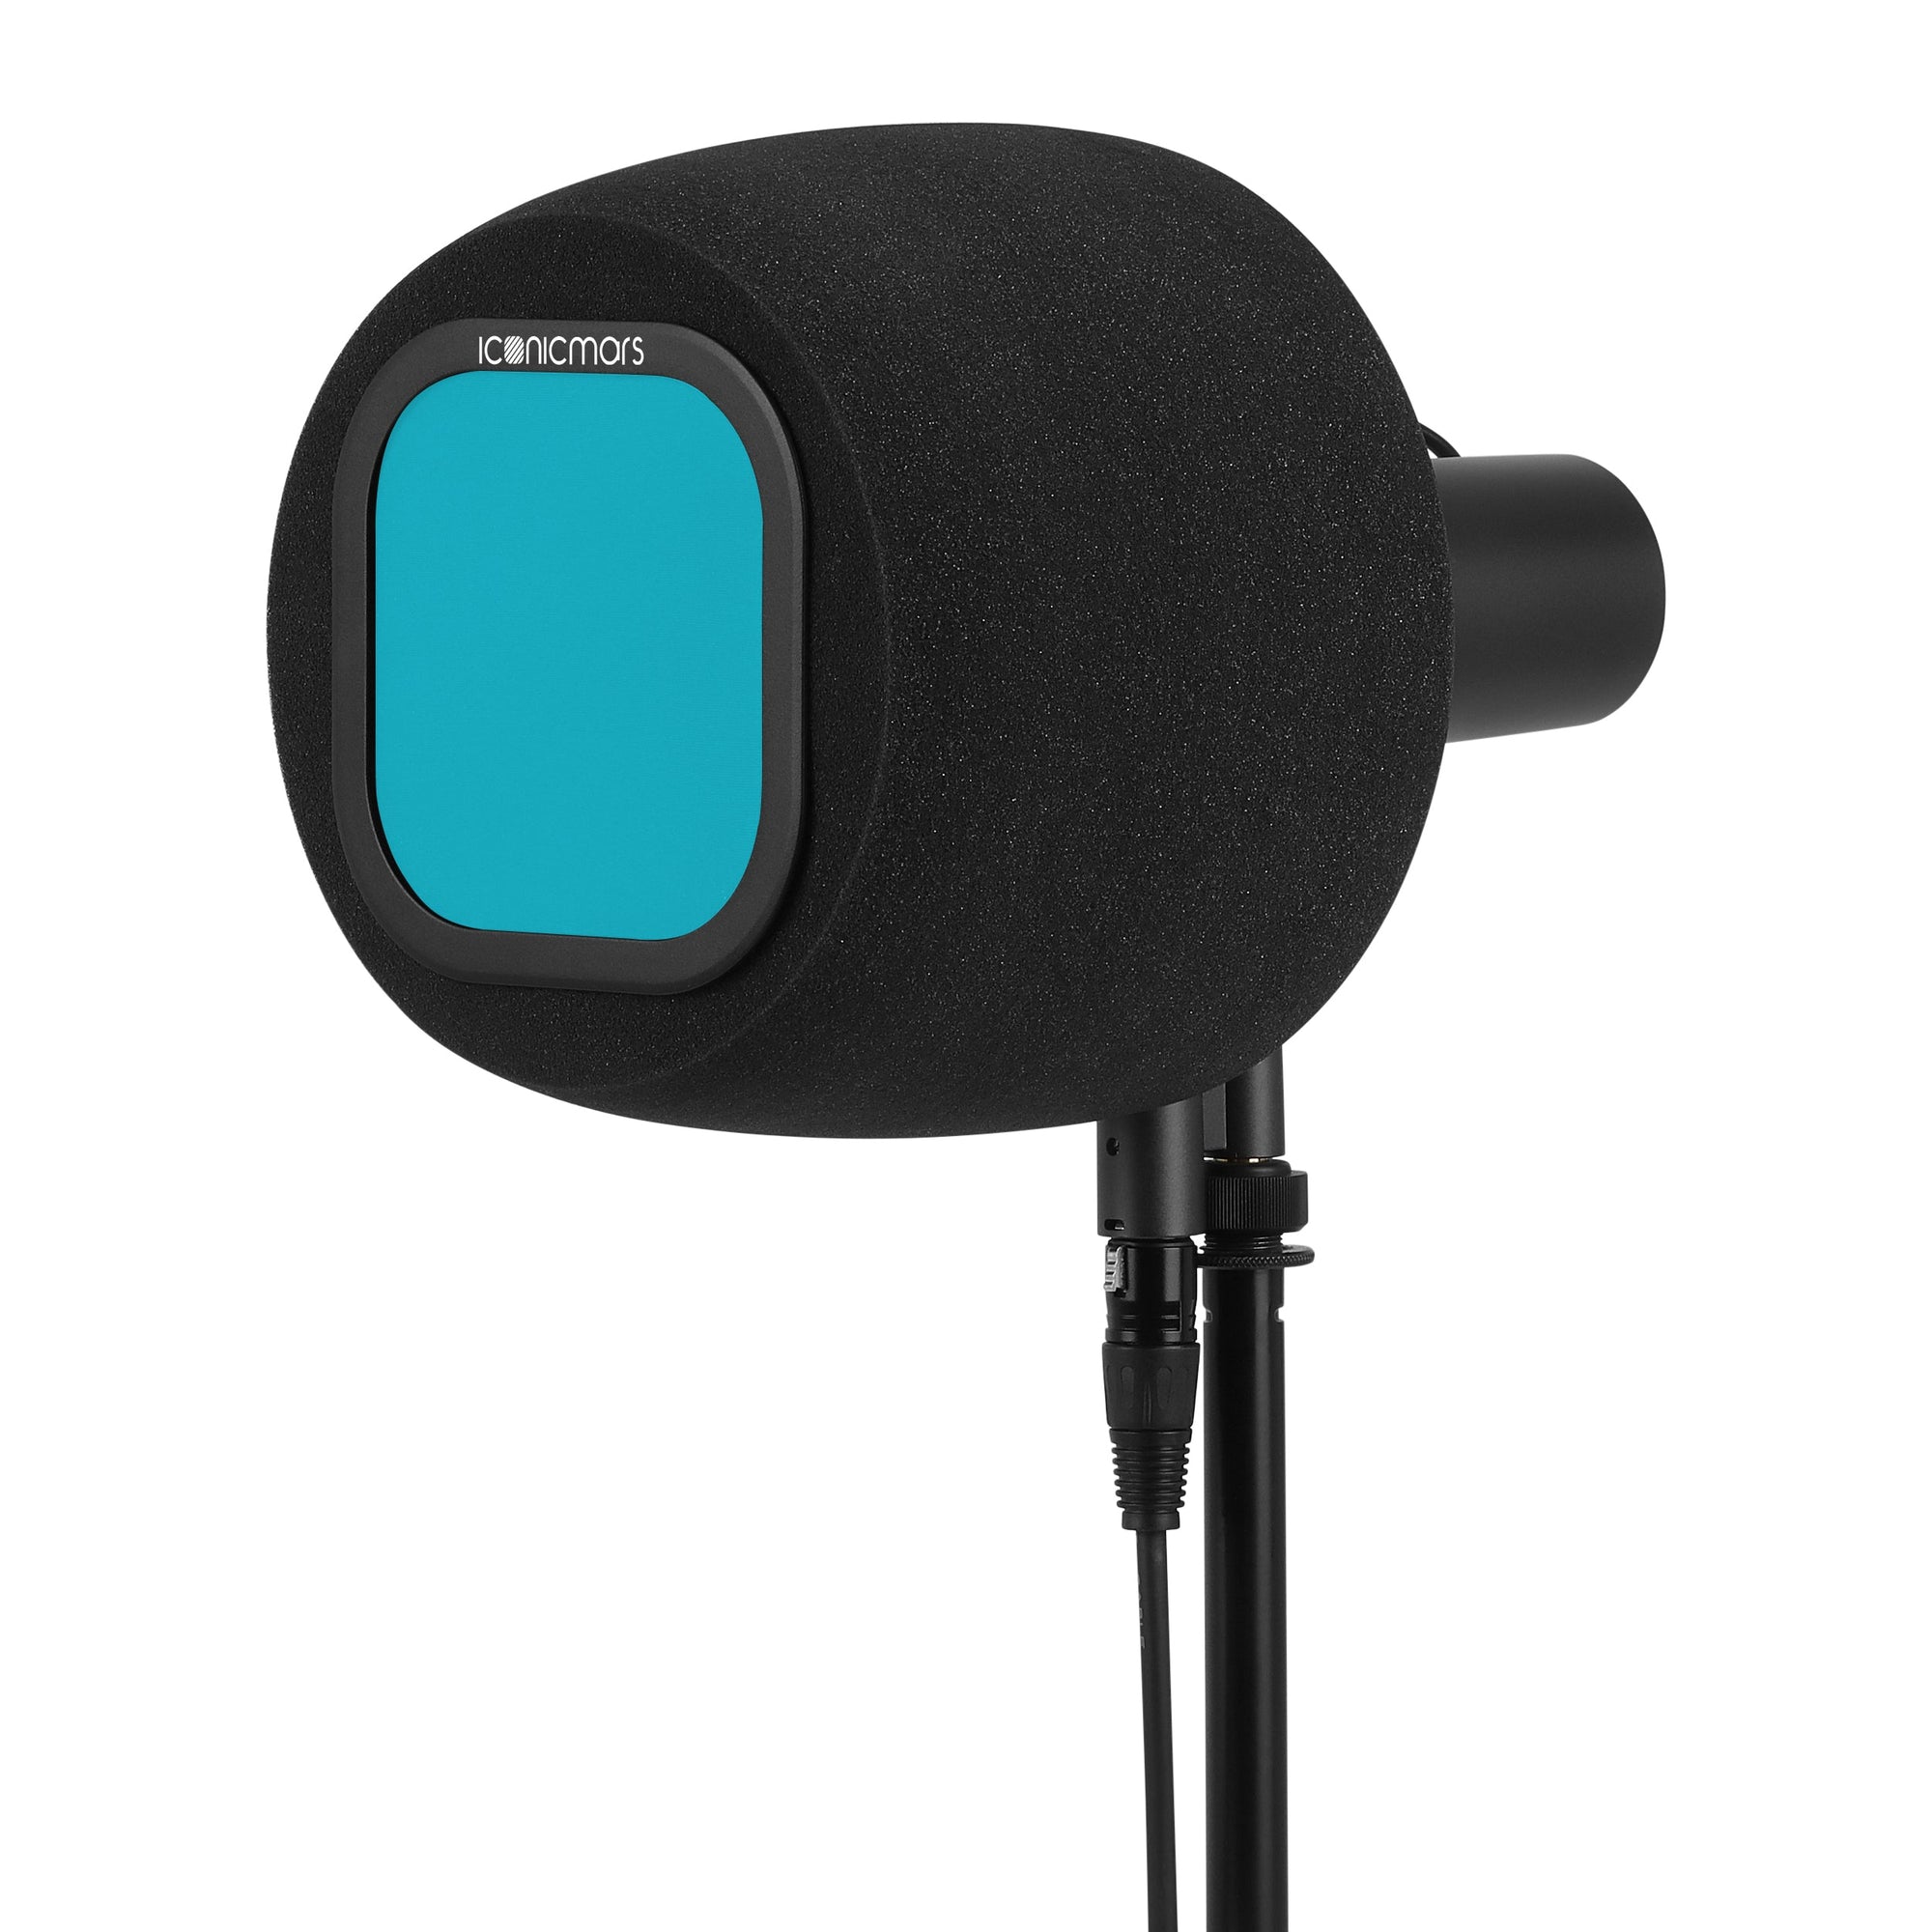 Comet X7B side with pop filter stand with eyeball like design for front facing microphone like Shure SM7B  -- Aqua Blue